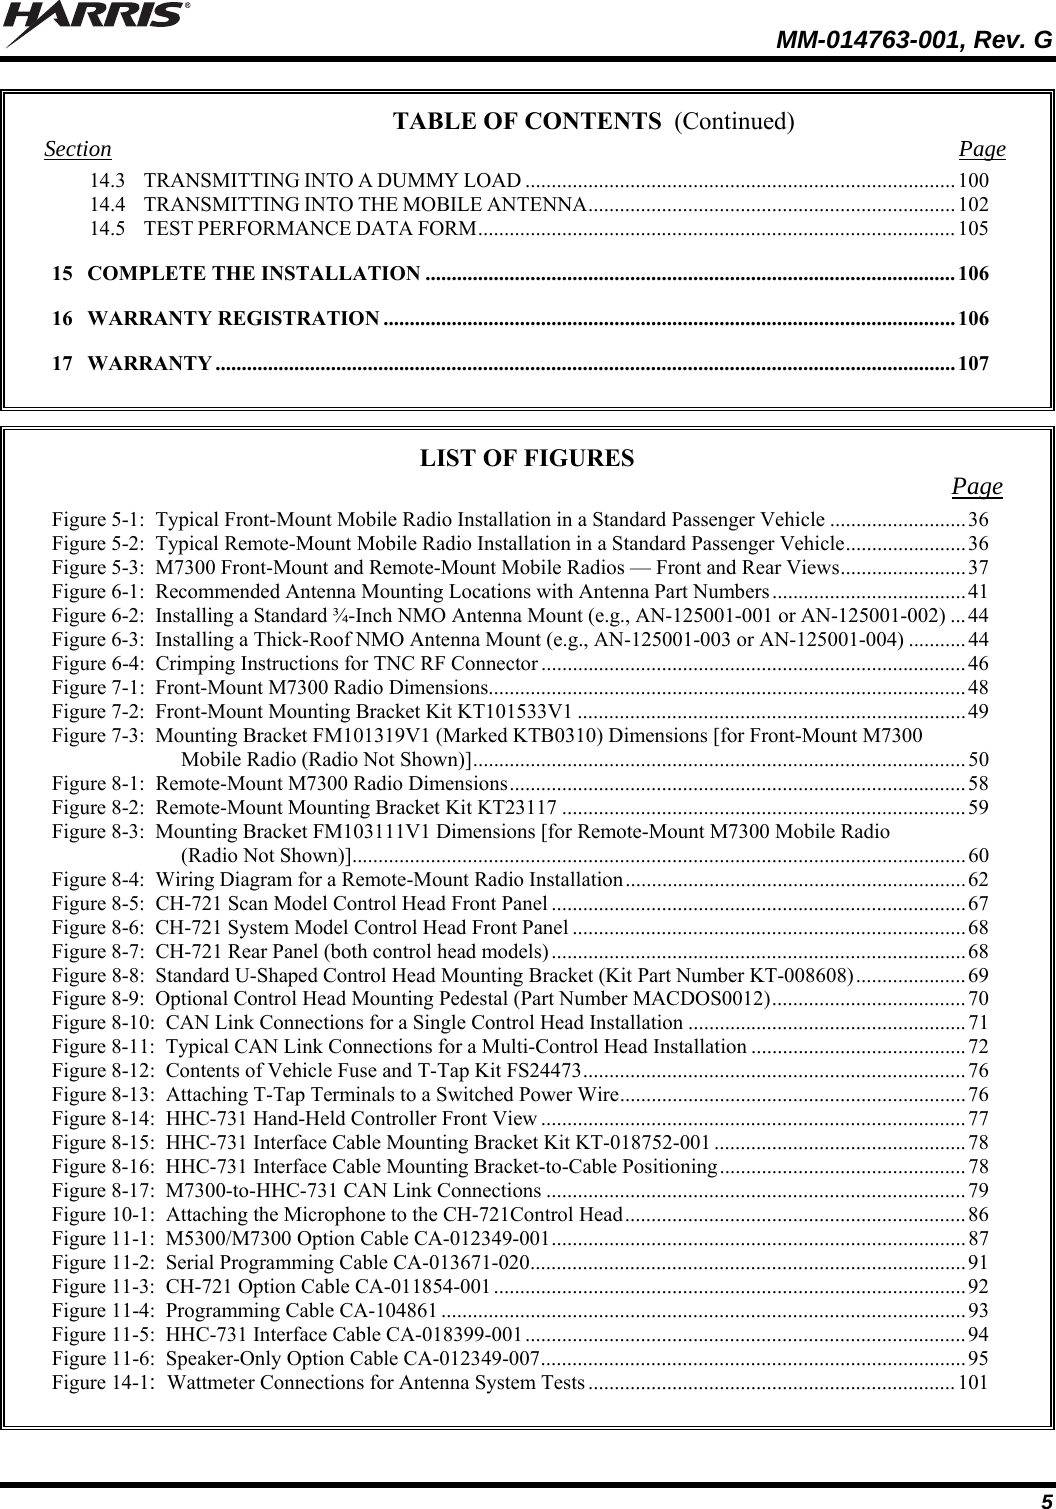   MM-014763-001, Rev. G 5 TABLE OF CONTENTS Section Page 14.3 TRANSMITTING INTO A DUMMY LOAD ..................................................................................100 14.4 TRANSMITTING INTO THE MOBILE ANTENNA...................................................................... 102 14.5 TEST PERFORMANCE DATA FORM........................................................................................... 105 15 COMPLETE THE INSTALLATION ..................................................................................................... 106 16 WARRANTY REGISTRATION ............................................................................................................. 106 17 WARRANTY ............................................................................................................................................. 107   LIST OF FIGURES  Page Figure 5-1:  Typical Front-Mount Mobile Radio Installation in a Standard Passenger Vehicle ..........................36 Figure 5-2:  Typical Remote-Mount Mobile Radio Installation in a Standard Passenger Vehicle.......................36 Figure 5-3:  M7300 Front-Mount and Remote-Mount Mobile Radios — Front and Rear Views........................37 Figure 6-1:  Recommended Antenna Mounting Locations with Antenna Part Numbers.....................................41 Figure 6-2:  Installing a Standard ¾-Inch NMO Antenna Mount (e.g., AN-125001-001 or AN-125001-002) ...44 Figure 6-3:  Installing a Thick-Roof NMO Antenna Mount (e.g., AN-125001-003 or AN-125001-004) ...........44 Figure 6-4:  Crimping Instructions for TNC RF Connector .................................................................................46 Figure 7-1:  Front-Mount M7300 Radio Dimensions...........................................................................................48 Figure 7-2:  Front-Mount Mounting Bracket Kit KT101533V1 ..........................................................................49 Figure 7-3:  Mounting Bracket FM101319V1 (Marked KTB0310) Dimensions [for Front-Mount M7300 Mobile Radio (Radio Not Shown)].............................................................................................. 50 Figure 8-1:  Remote-Mount M7300 Radio Dimensions....................................................................................... 58 Figure 8-2:  Remote-Mount Mounting Bracket Kit KT23117 ............................................................................. 59 Figure 8-3:  Mounting Bracket FM103111V1 Dimensions [for Remote-Mount M7300 Mobile Radio (Radio Not Shown)].....................................................................................................................60 Figure 8-4:  Wiring Diagram for a Remote-Mount Radio Installation.................................................................62 Figure 8-5:  CH-721 Scan Model Control Head Front Panel ...............................................................................67 Figure 8-6:  CH-721 System Model Control Head Front Panel ........................................................................... 68 Figure 8-7:  CH-721 Rear Panel (both control head models)............................................................................... 68 Figure 8-8:  Standard U-Shaped Control Head Mounting Bracket (Kit Part Number KT-008608)..................... 69 Figure 8-9:  Optional Control Head Mounting Pedestal (Part Number MACDOS0012).....................................70 Figure 8-10:  CAN Link Connections for a Single Control Head Installation .....................................................71 Figure 8-11:  Typical CAN Link Connections for a Multi-Control Head Installation .........................................72 Figure 8-12:  Contents of Vehicle Fuse and T-Tap Kit FS24473.........................................................................76 Figure 8-13:  Attaching T-Tap Terminals to a Switched Power Wire..................................................................76 Figure 8-14:  HHC-731 Hand-Held Controller Front View .................................................................................77 Figure 8-15:  HHC-731 Interface Cable Mounting Bracket Kit KT-018752-001 ................................................78 Figure 8-16:  HHC-731 Interface Cable Mounting Bracket-to-Cable Positioning............................................... 78 Figure 8-17:  M7300-to-HHC-731 CAN Link Connections ................................................................................79 Figure 10-1:  Attaching the Microphone to the CH-721Control Head................................................................. 86 Figure 11-1:  M5300/M7300 Option Cable CA-012349-001...............................................................................87 Figure 11-2:  Serial Programming Cable CA-013671-020...................................................................................91 Figure 11-3:  CH-721 Option Cable CA-011854-001..........................................................................................92 Figure 11-4:  Programming Cable CA-104861 ....................................................................................................93 Figure 11-5:  HHC-731 Interface Cable CA-018399-001....................................................................................94 Figure 11-6:  Speaker-Only Option Cable CA-012349-007................................................................................. 95 Figure 14-1:  Wattmeter Connections for Antenna System Tests ......................................................................101   (Continued) 